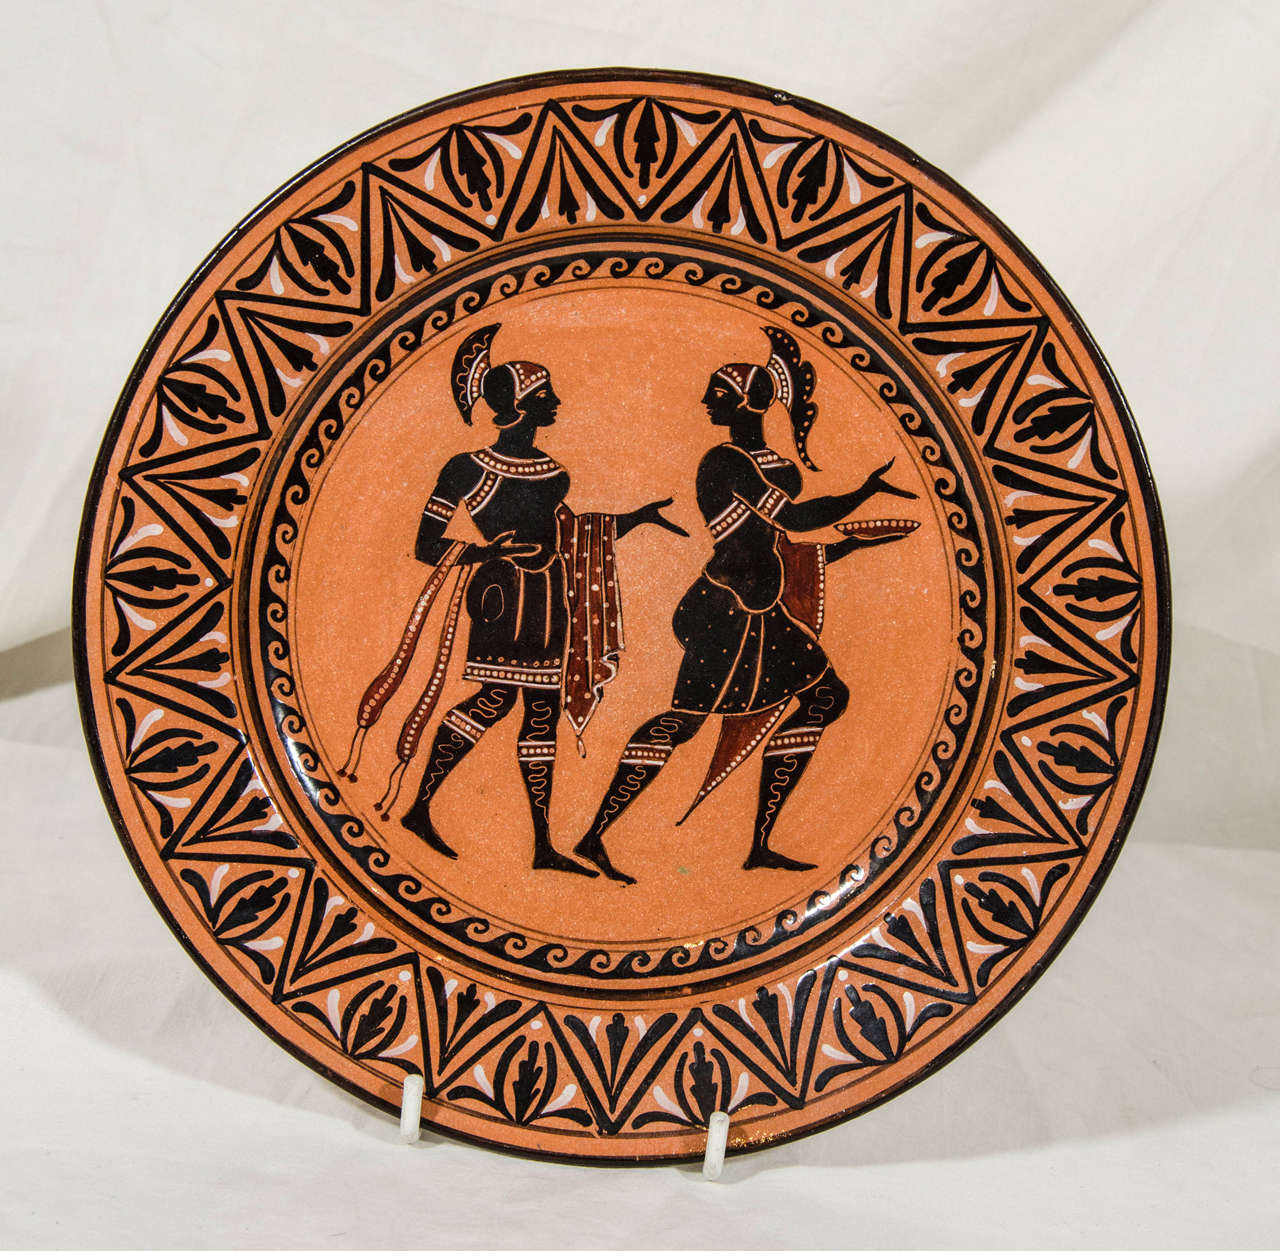 Painted with Roman figures in black, white and brownish red on a glazed terracotta ground. Made in the factory of the Giustiniani family which began making fine ceramics in Naples in the 18th century.